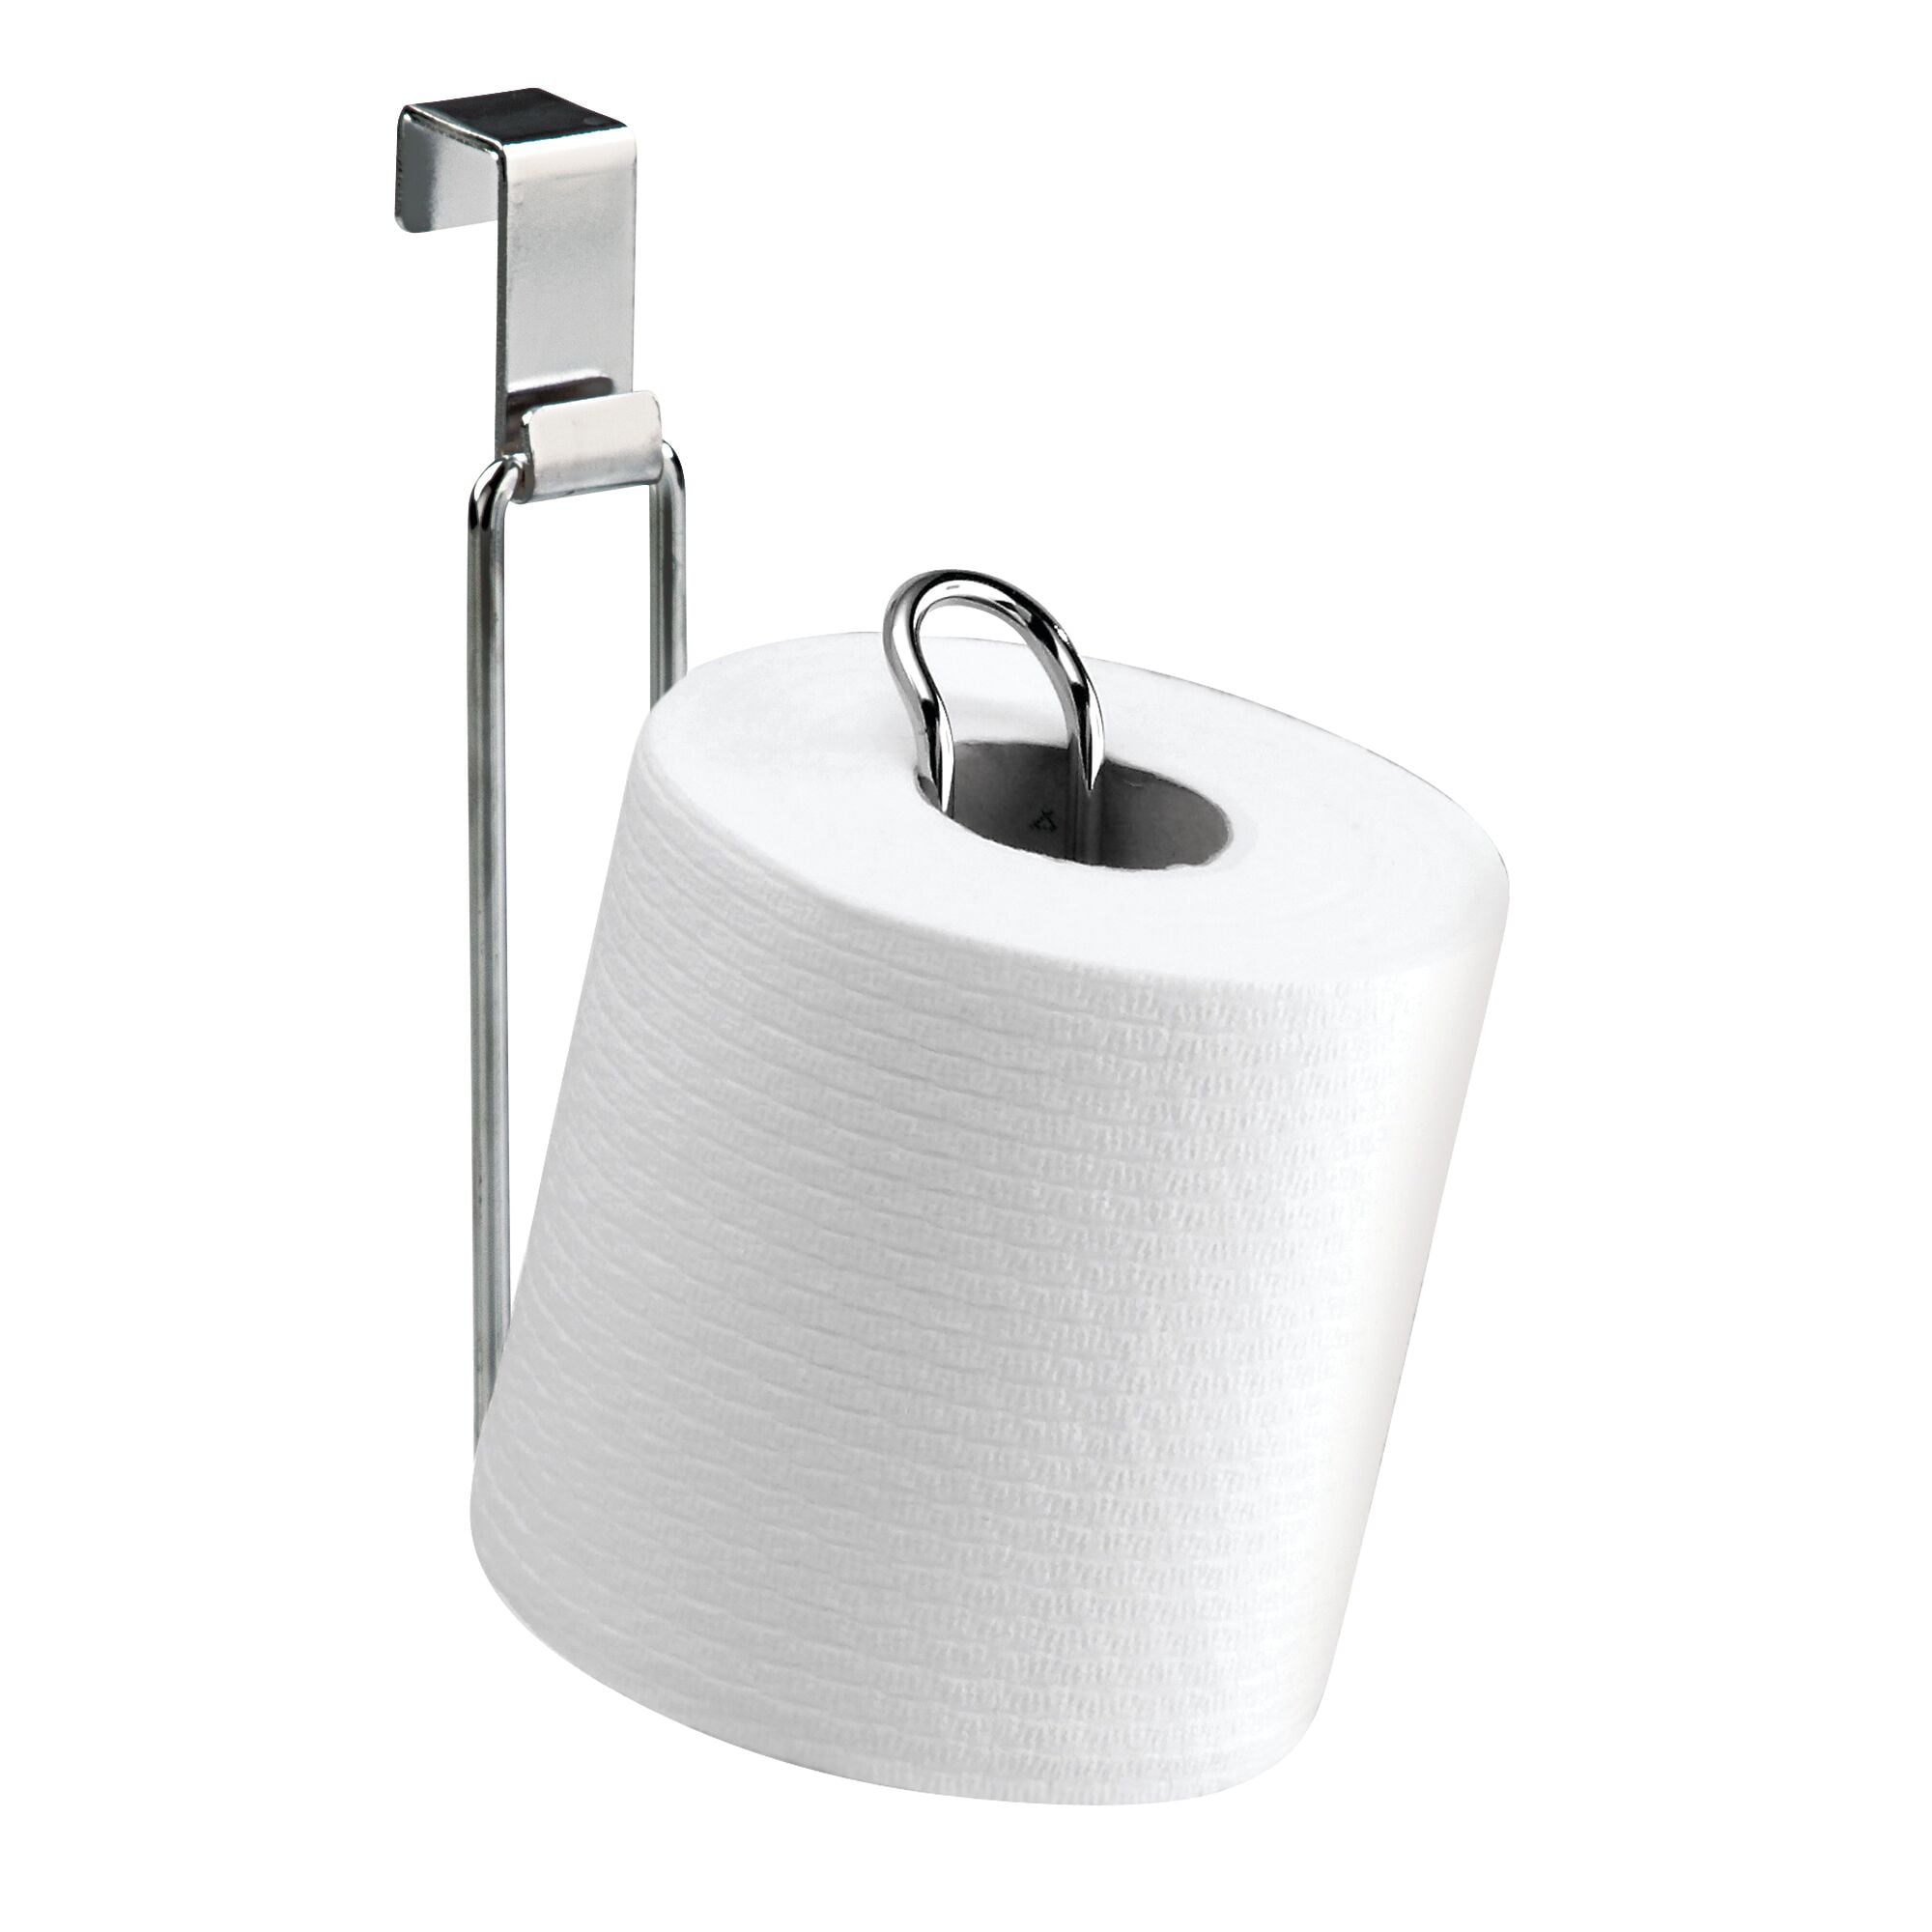 Acrylic and Polished Nickel Free Standing Toilet Paper Holder + Reviews